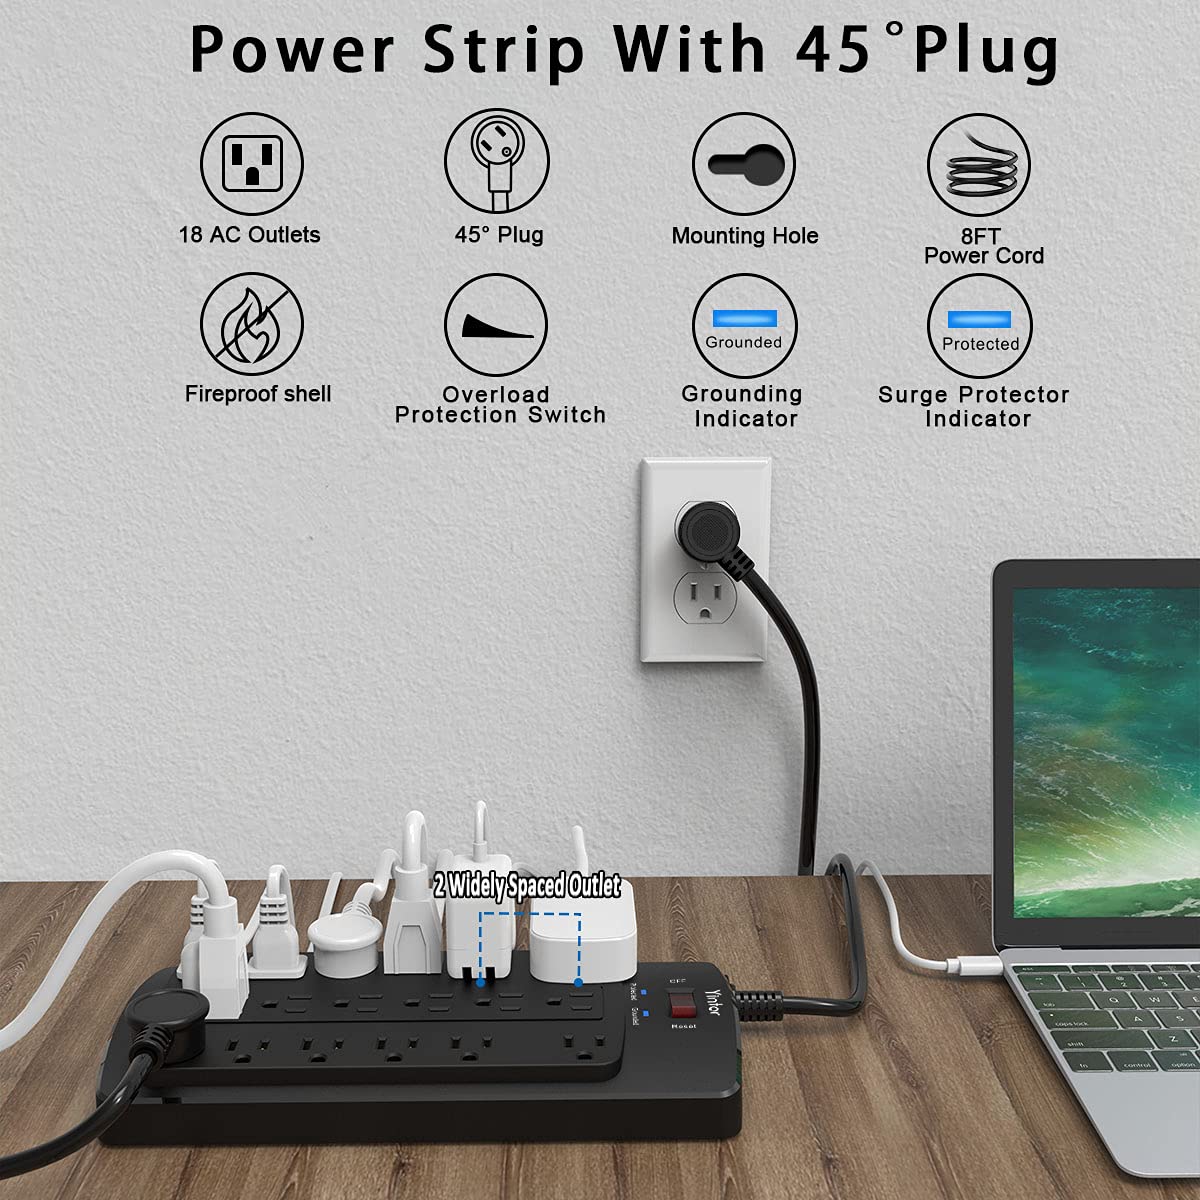 8 Ft Power Strip, Yintar Surge Protector with 18 AC Outlets, 8 Feet Flat Plug Extension Cord (1875W/15A) for for Home, Office, Dorm Essentials, 2100 Joules, ETL Listed, Black